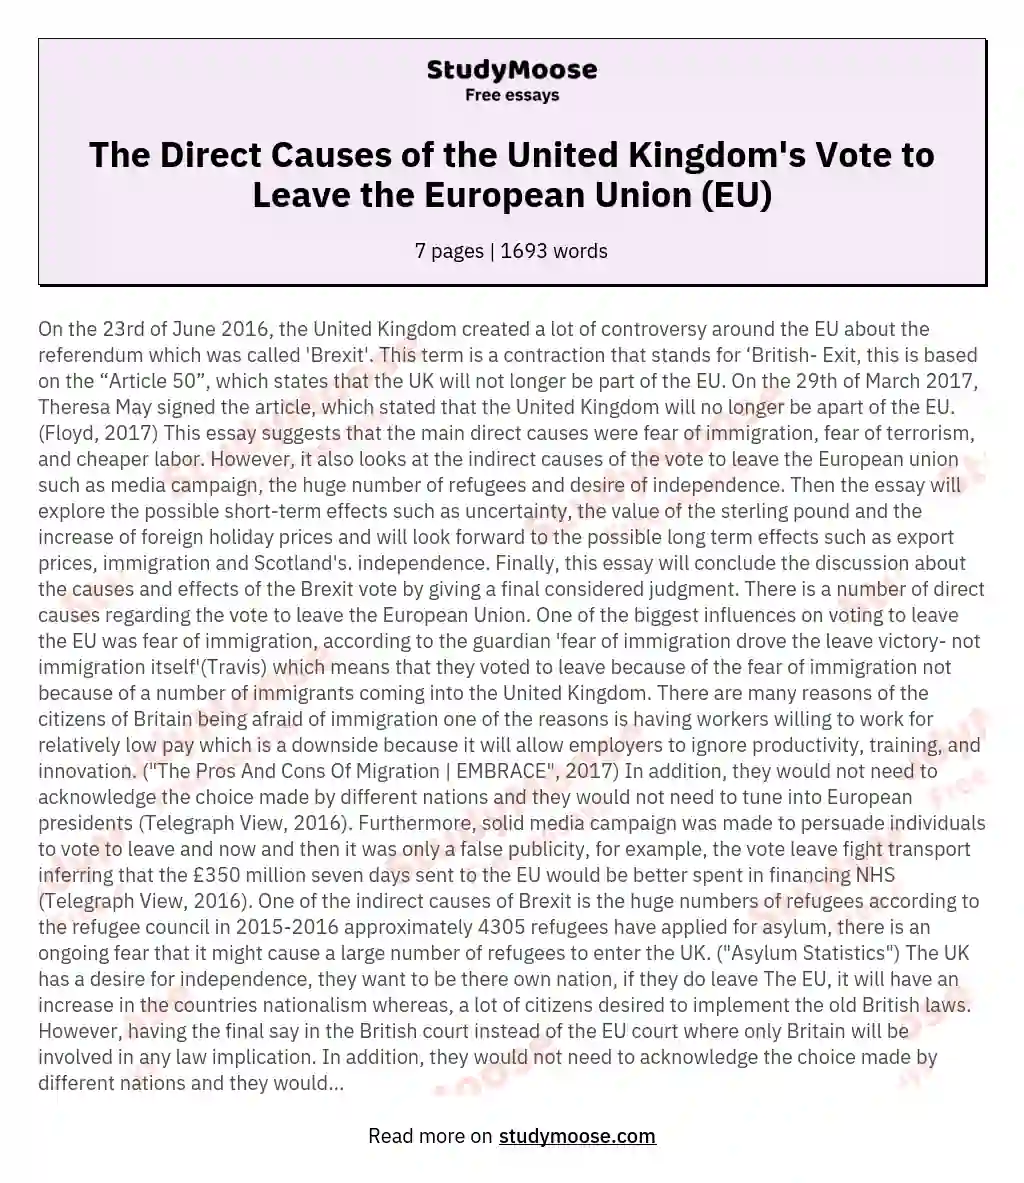 The Direct Causes of the United Kingdom's Vote to Leave the European Union (EU) essay